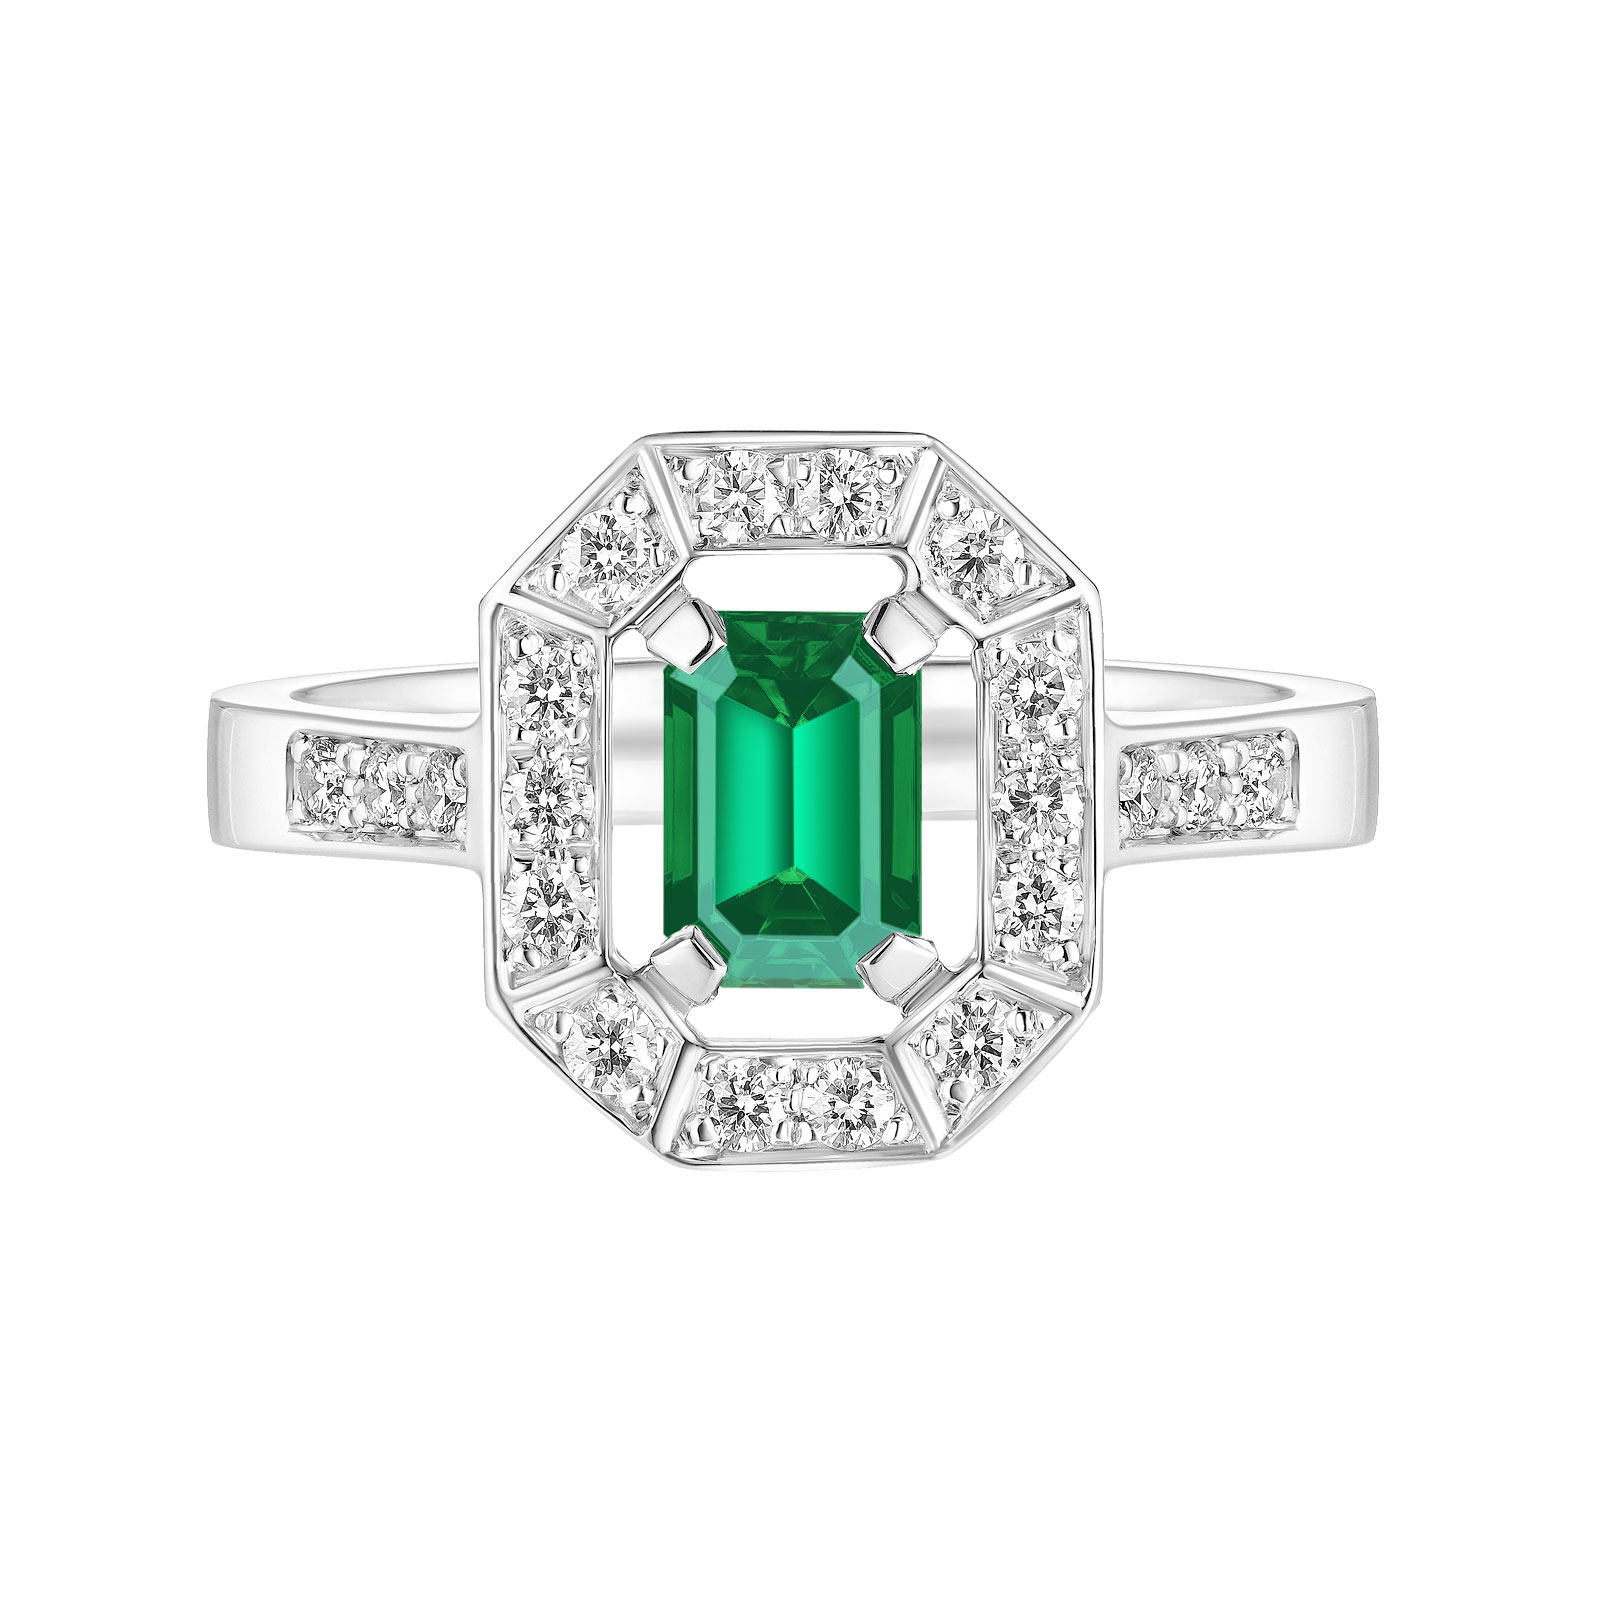 Ring White gold Emerald and diamonds Art Déco 1